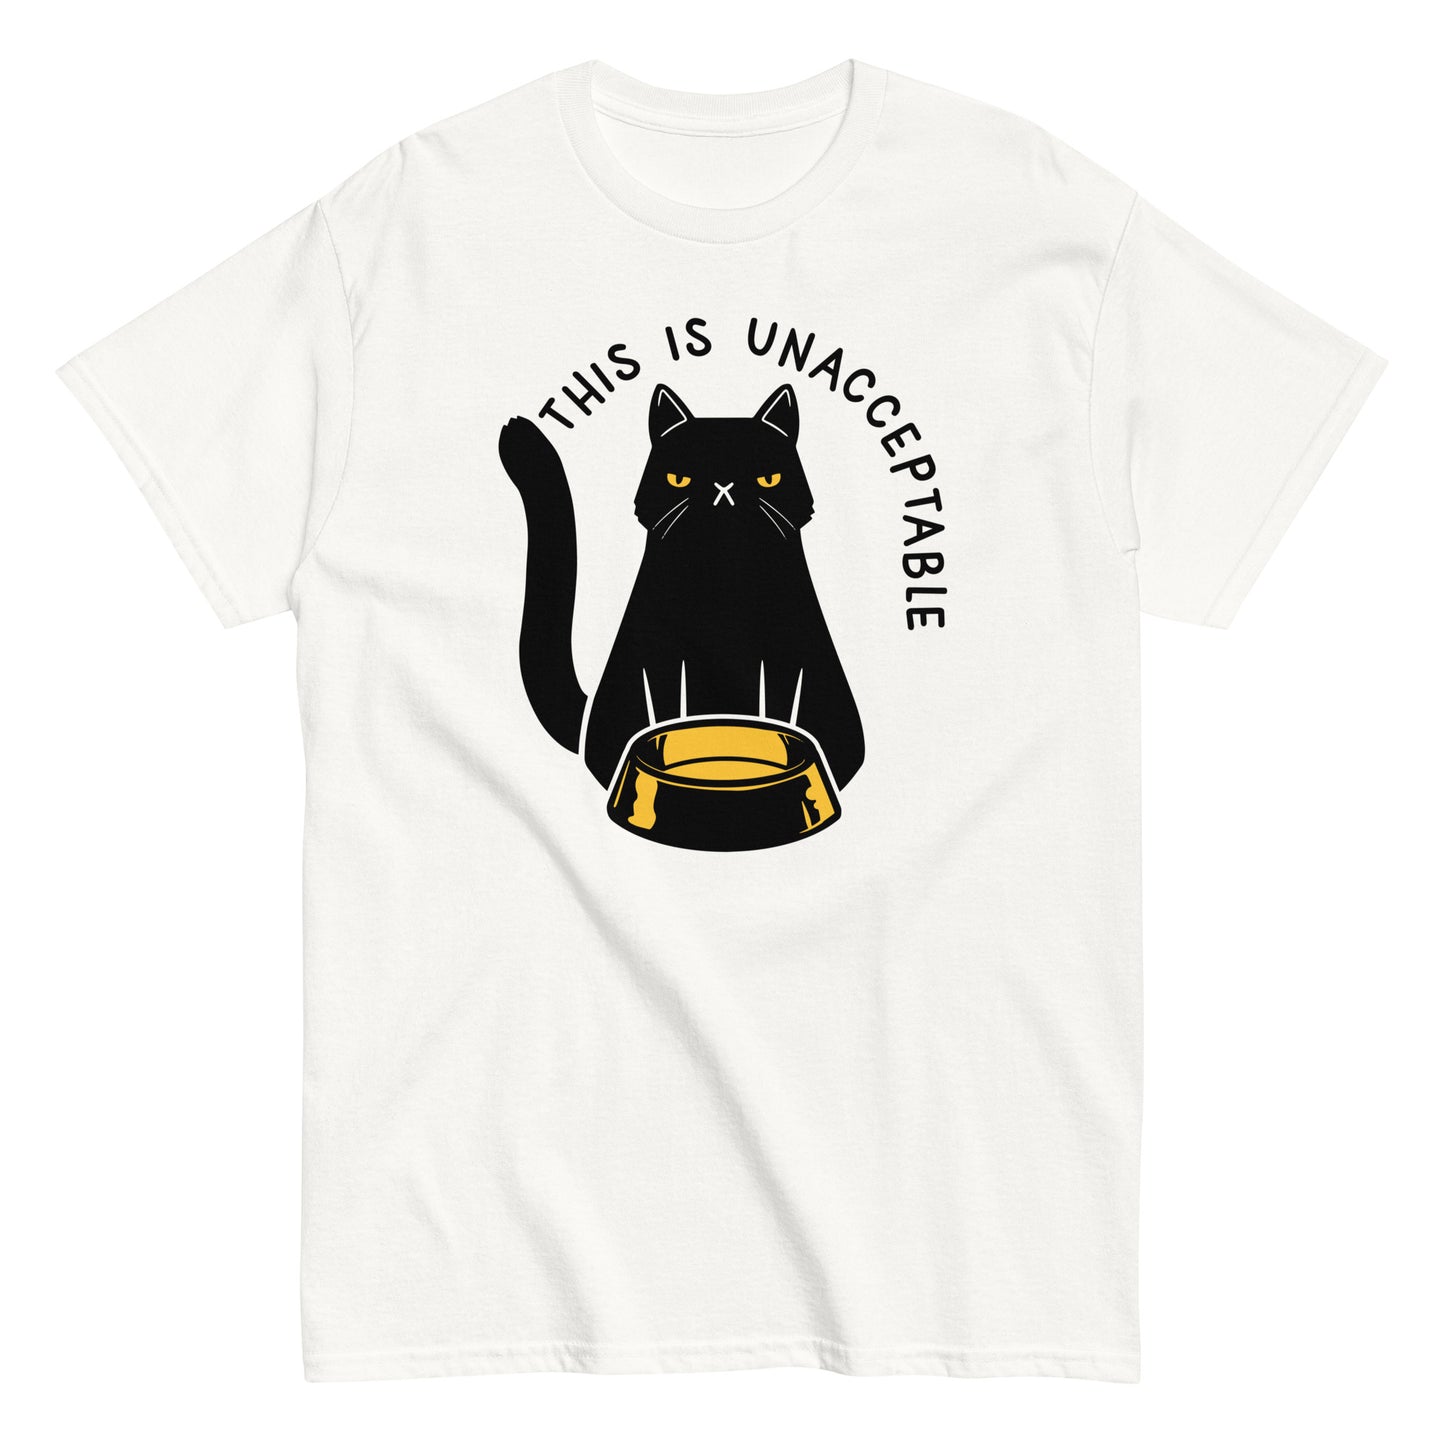 This Is Unacceptable Men's Classic Tee